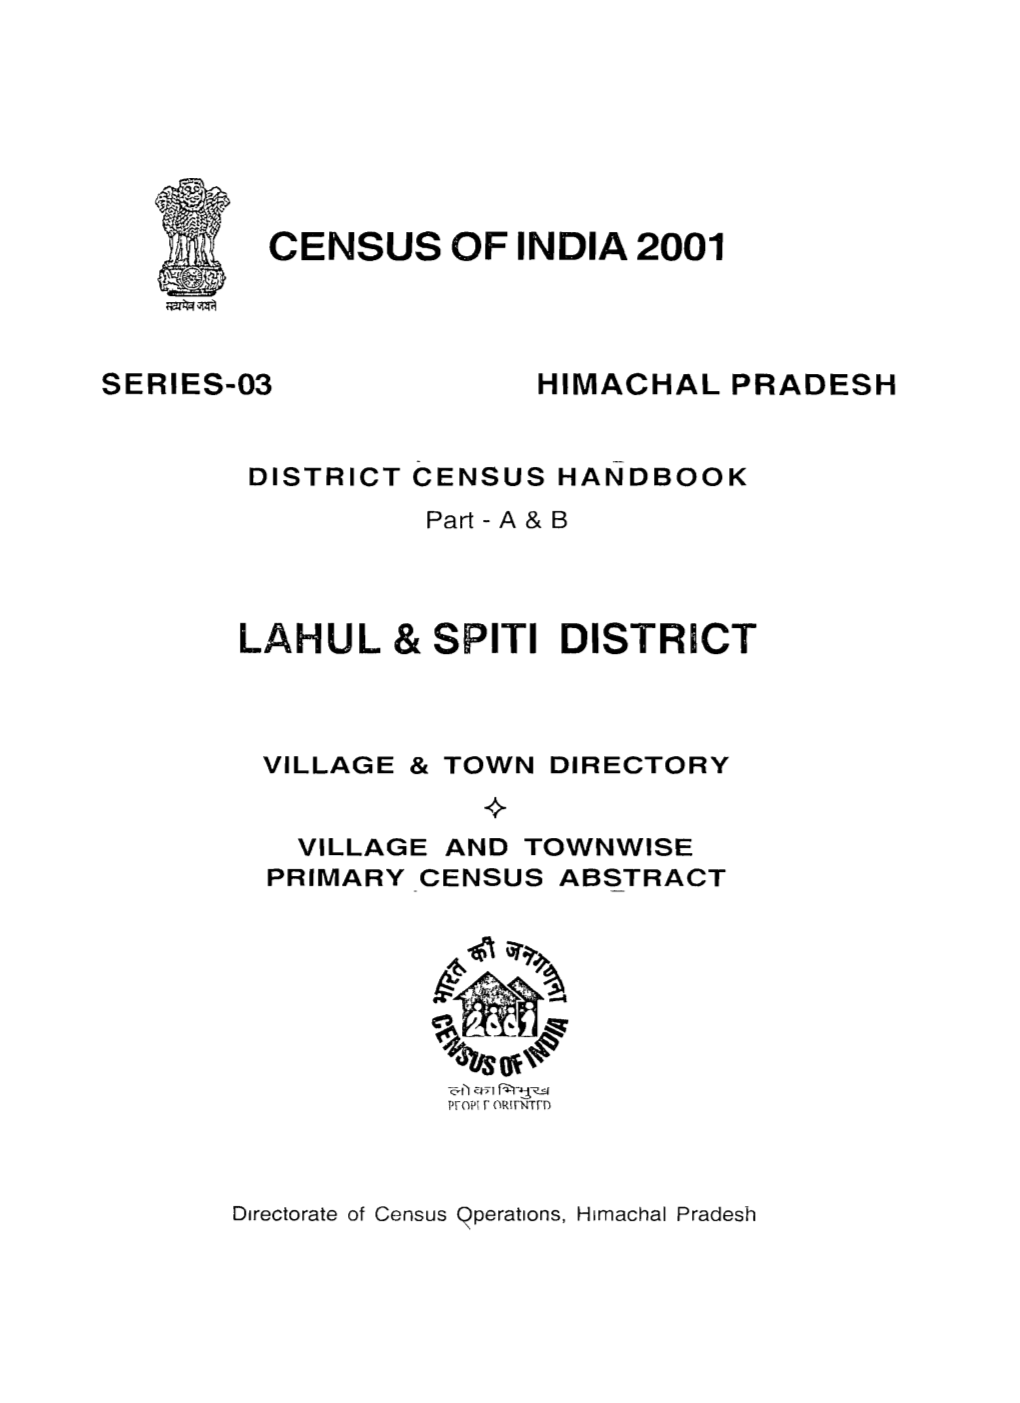 Village and Townwise Primary Census Abstract, Lahul & Spiti, Part -XII- a & B, Series-3 , Himachal Pradesh